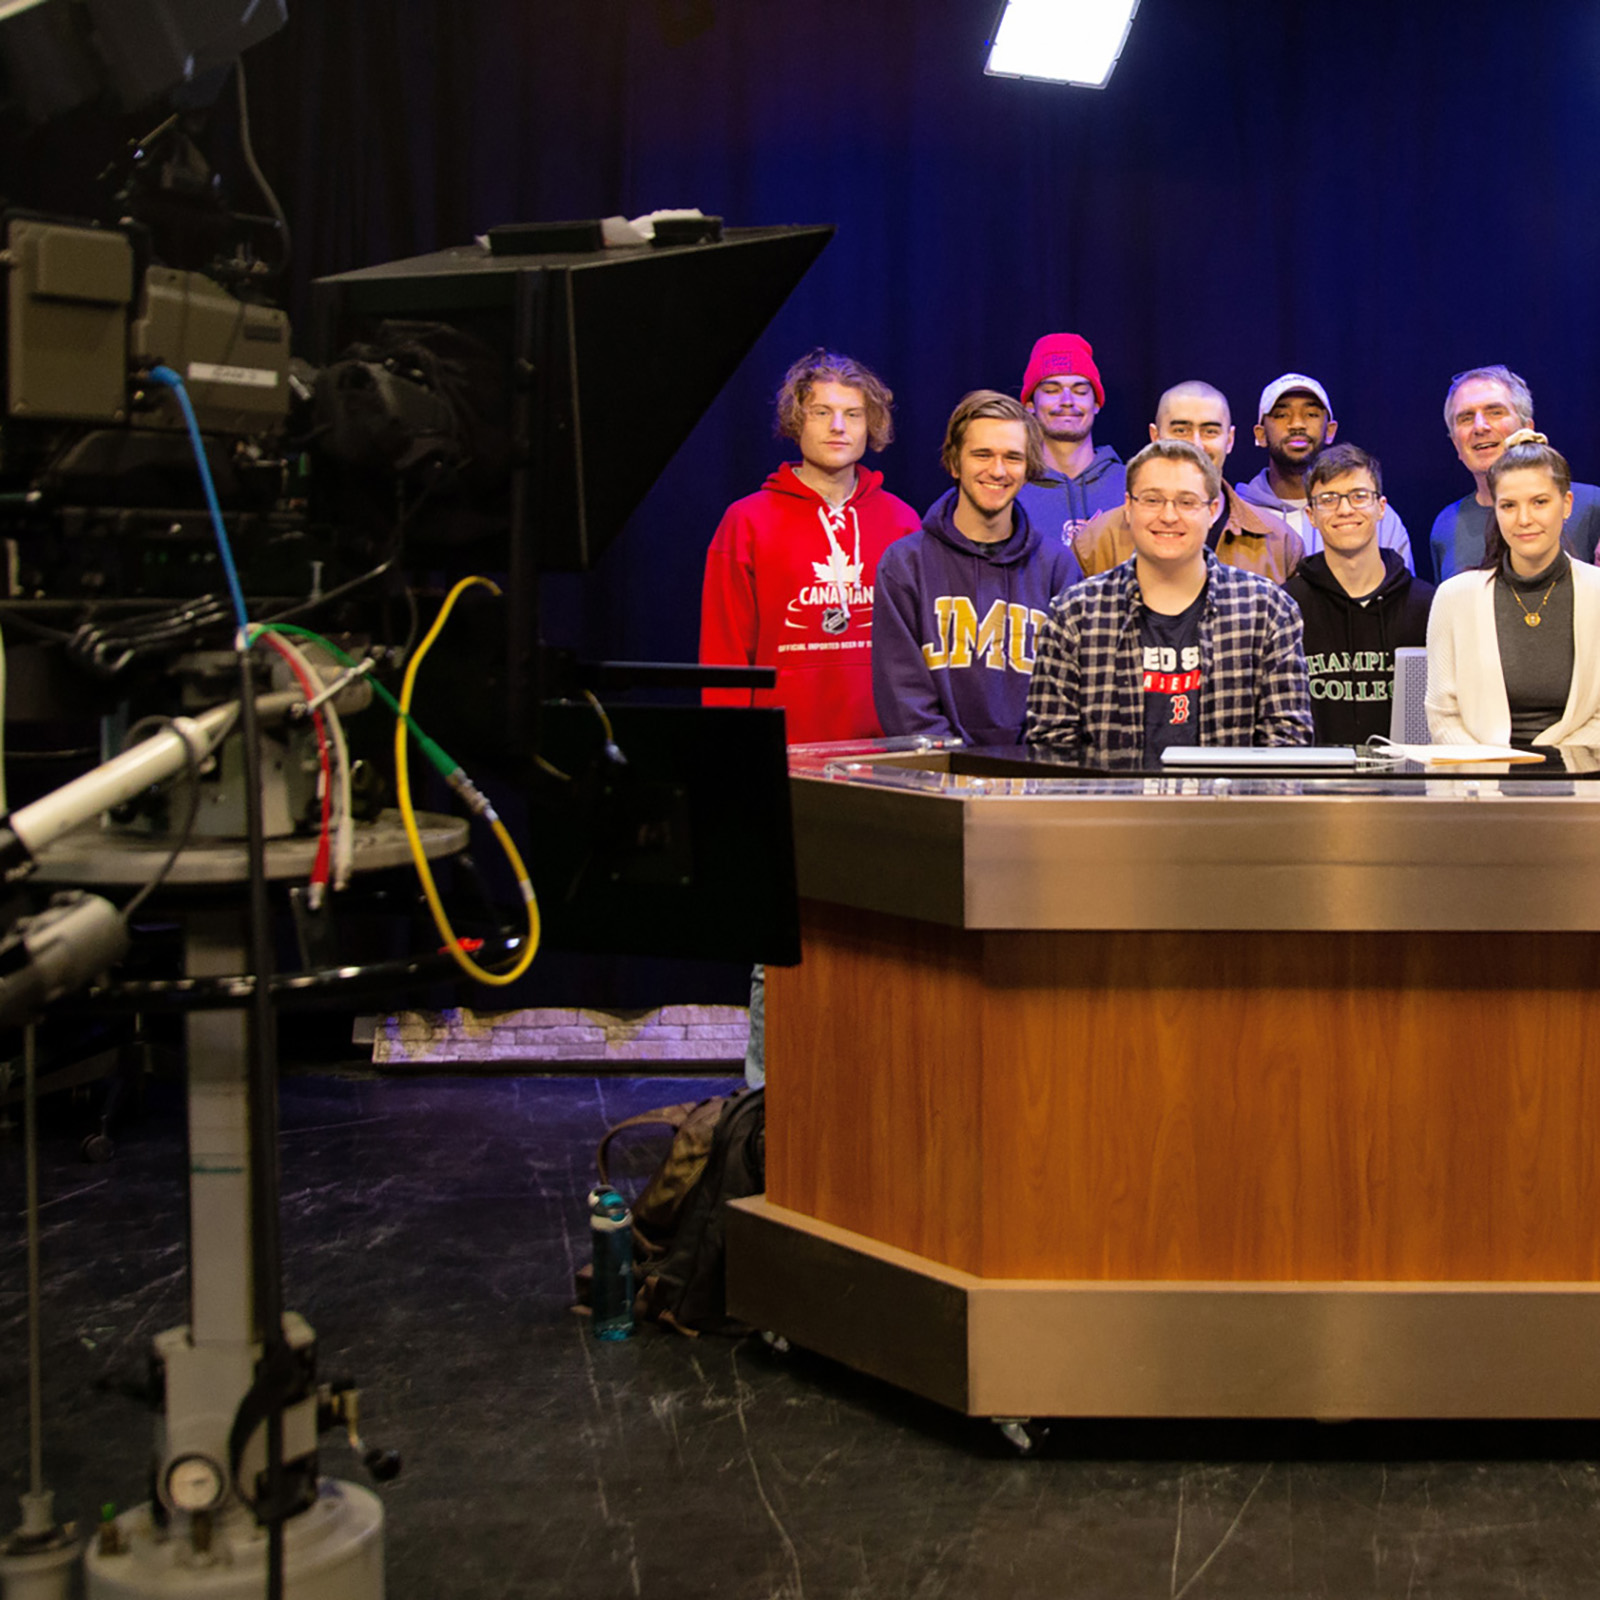 groups of students at news desk, broadcast camera in the foreground